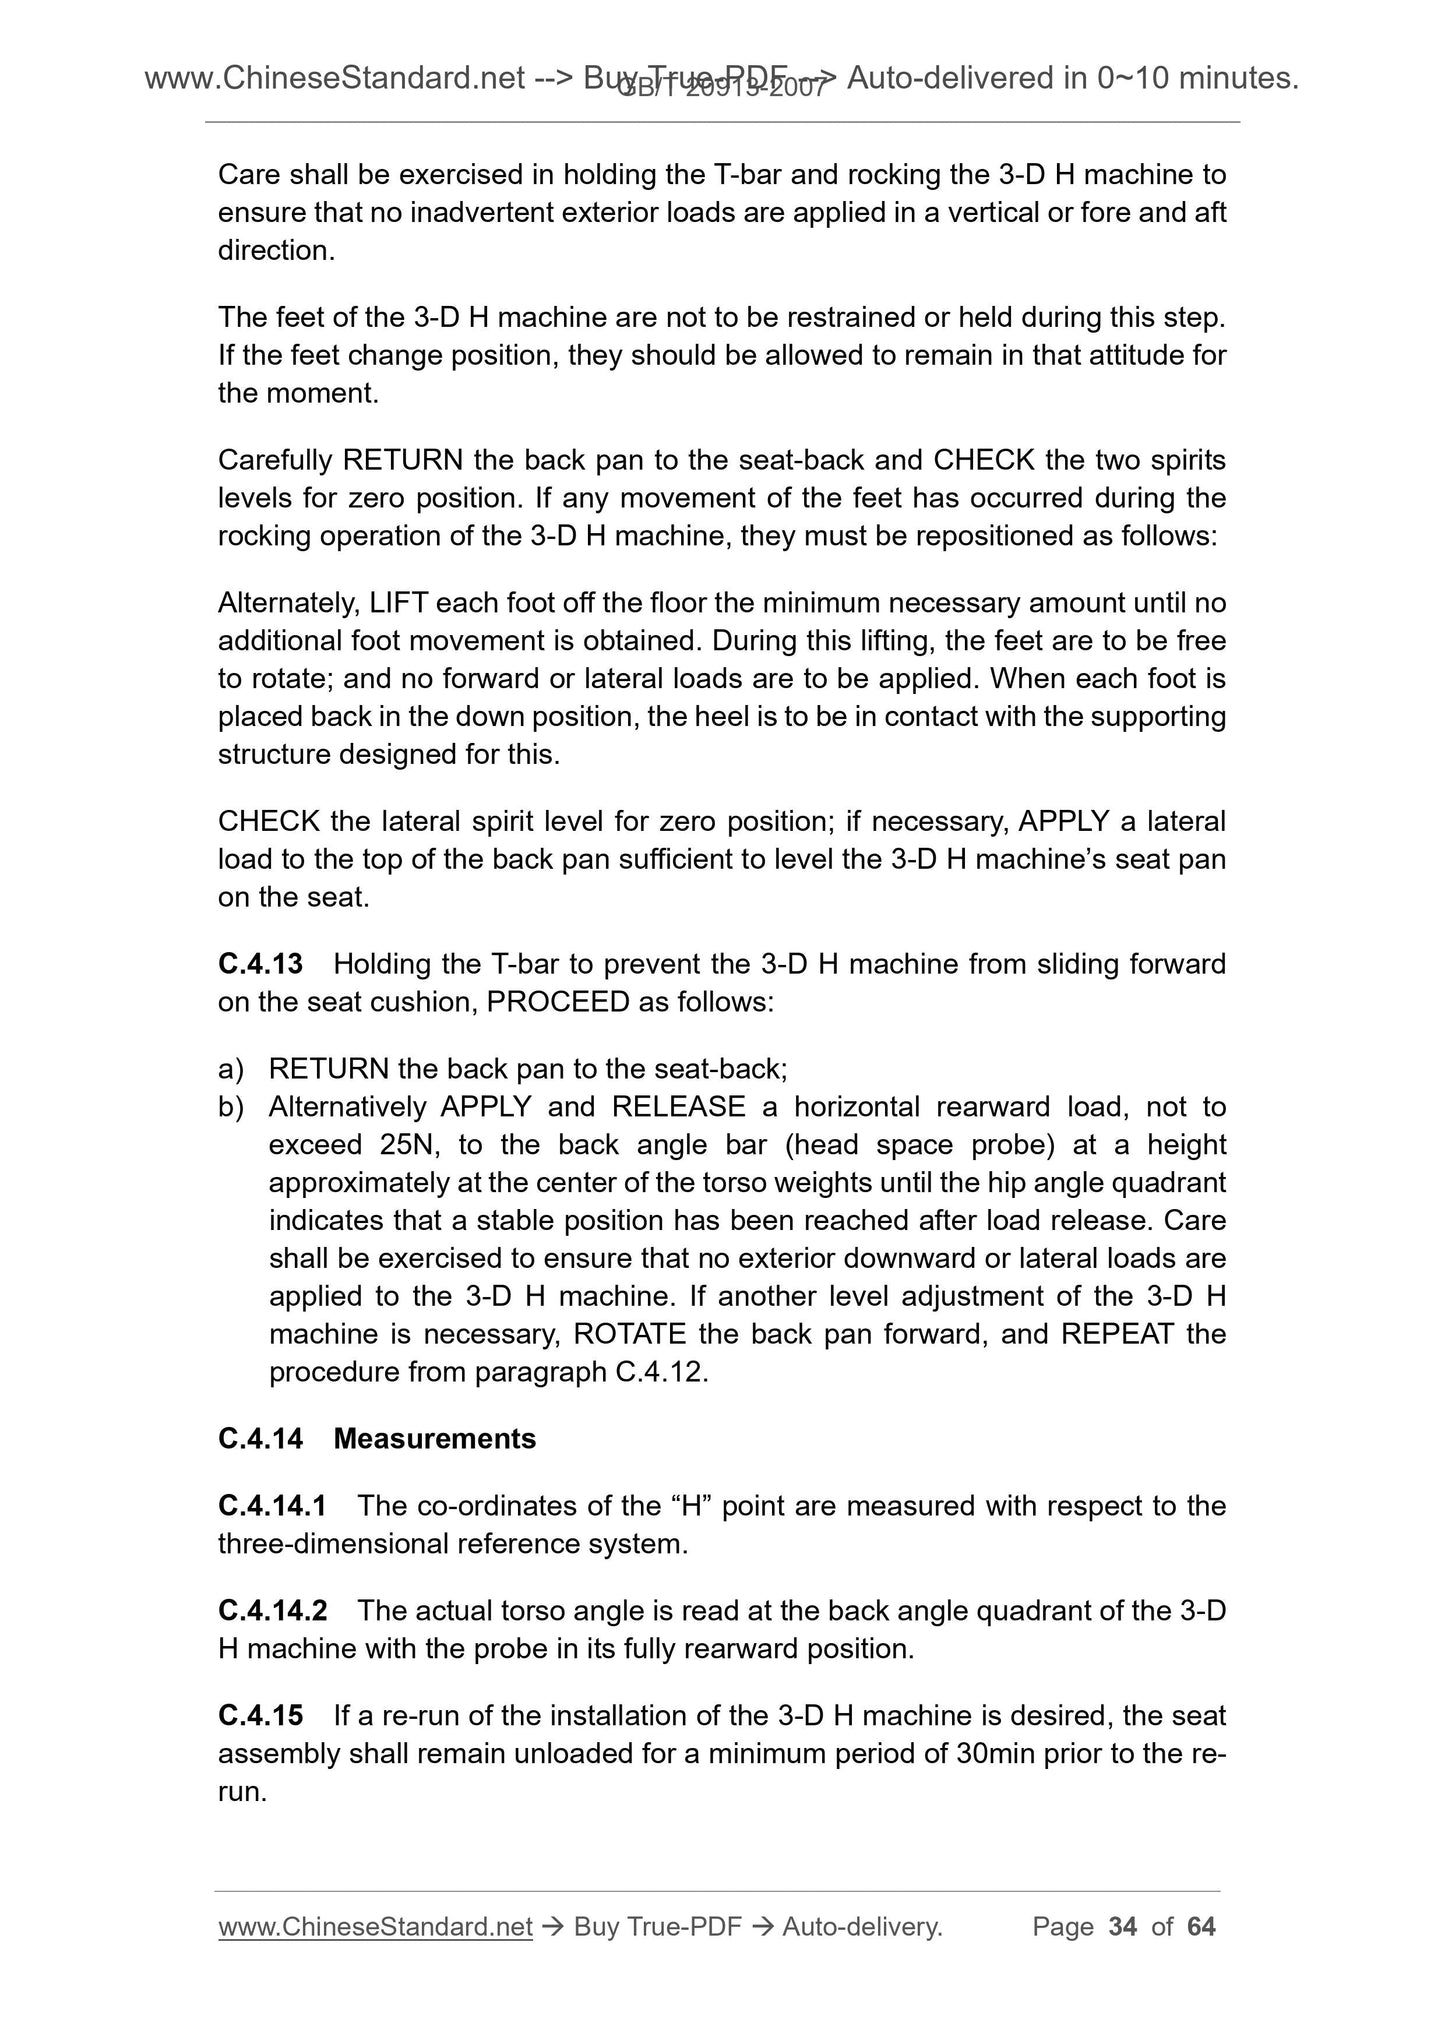 GB/T 20913-2007 Page 11